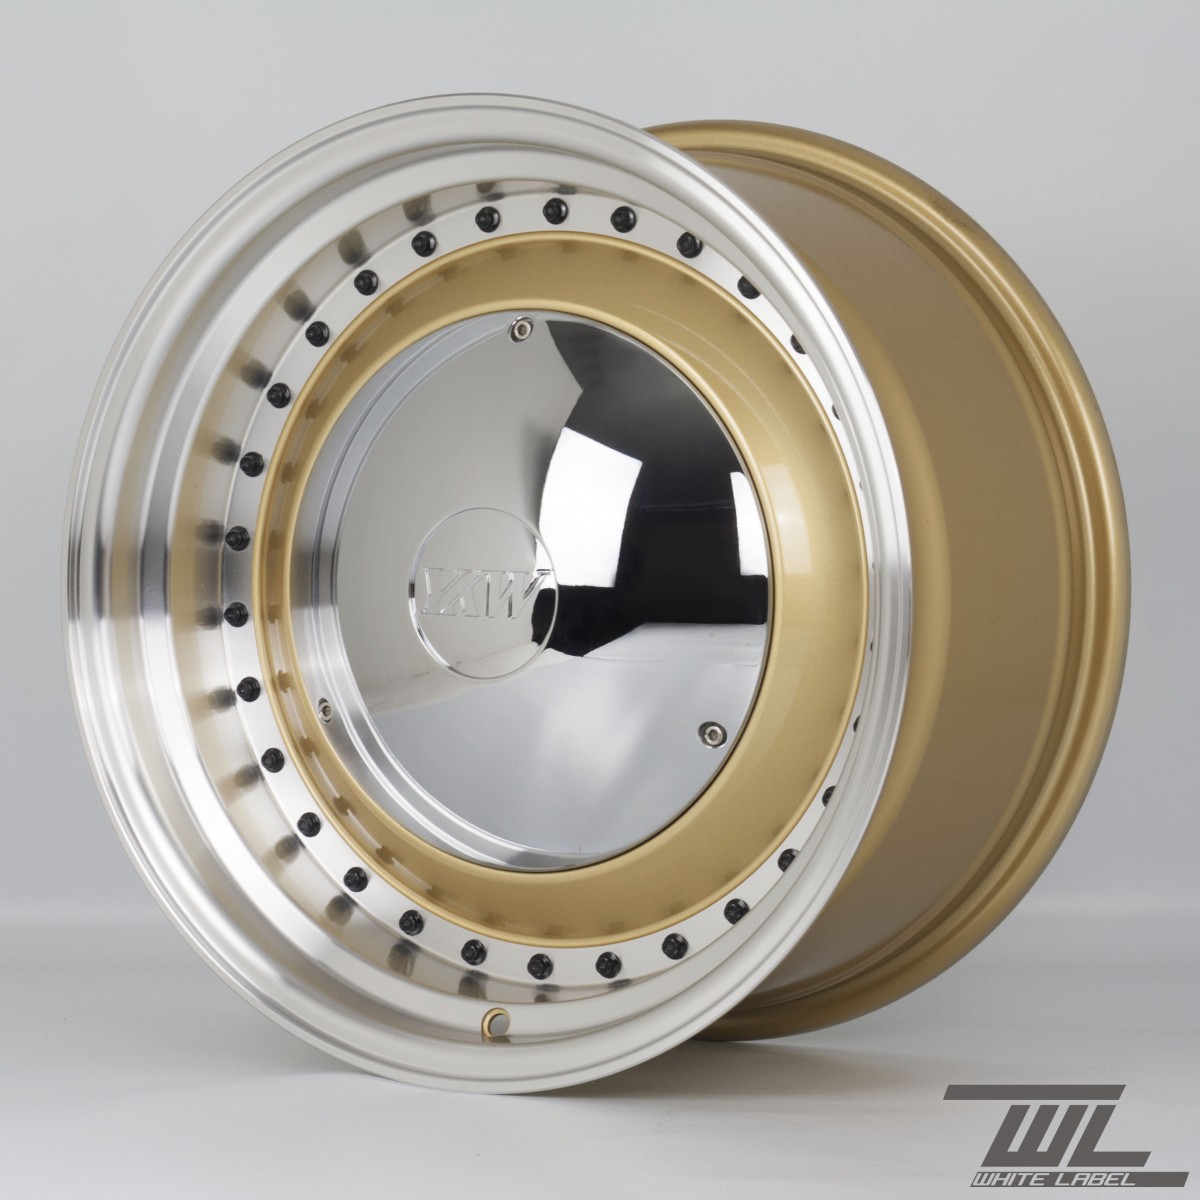 White Label YKW7708 Smoothie 17x7.5 and 17x8.5 5x100 Staggered Wheel Set in Gold with Polished Lip and Chrome Hub Cap